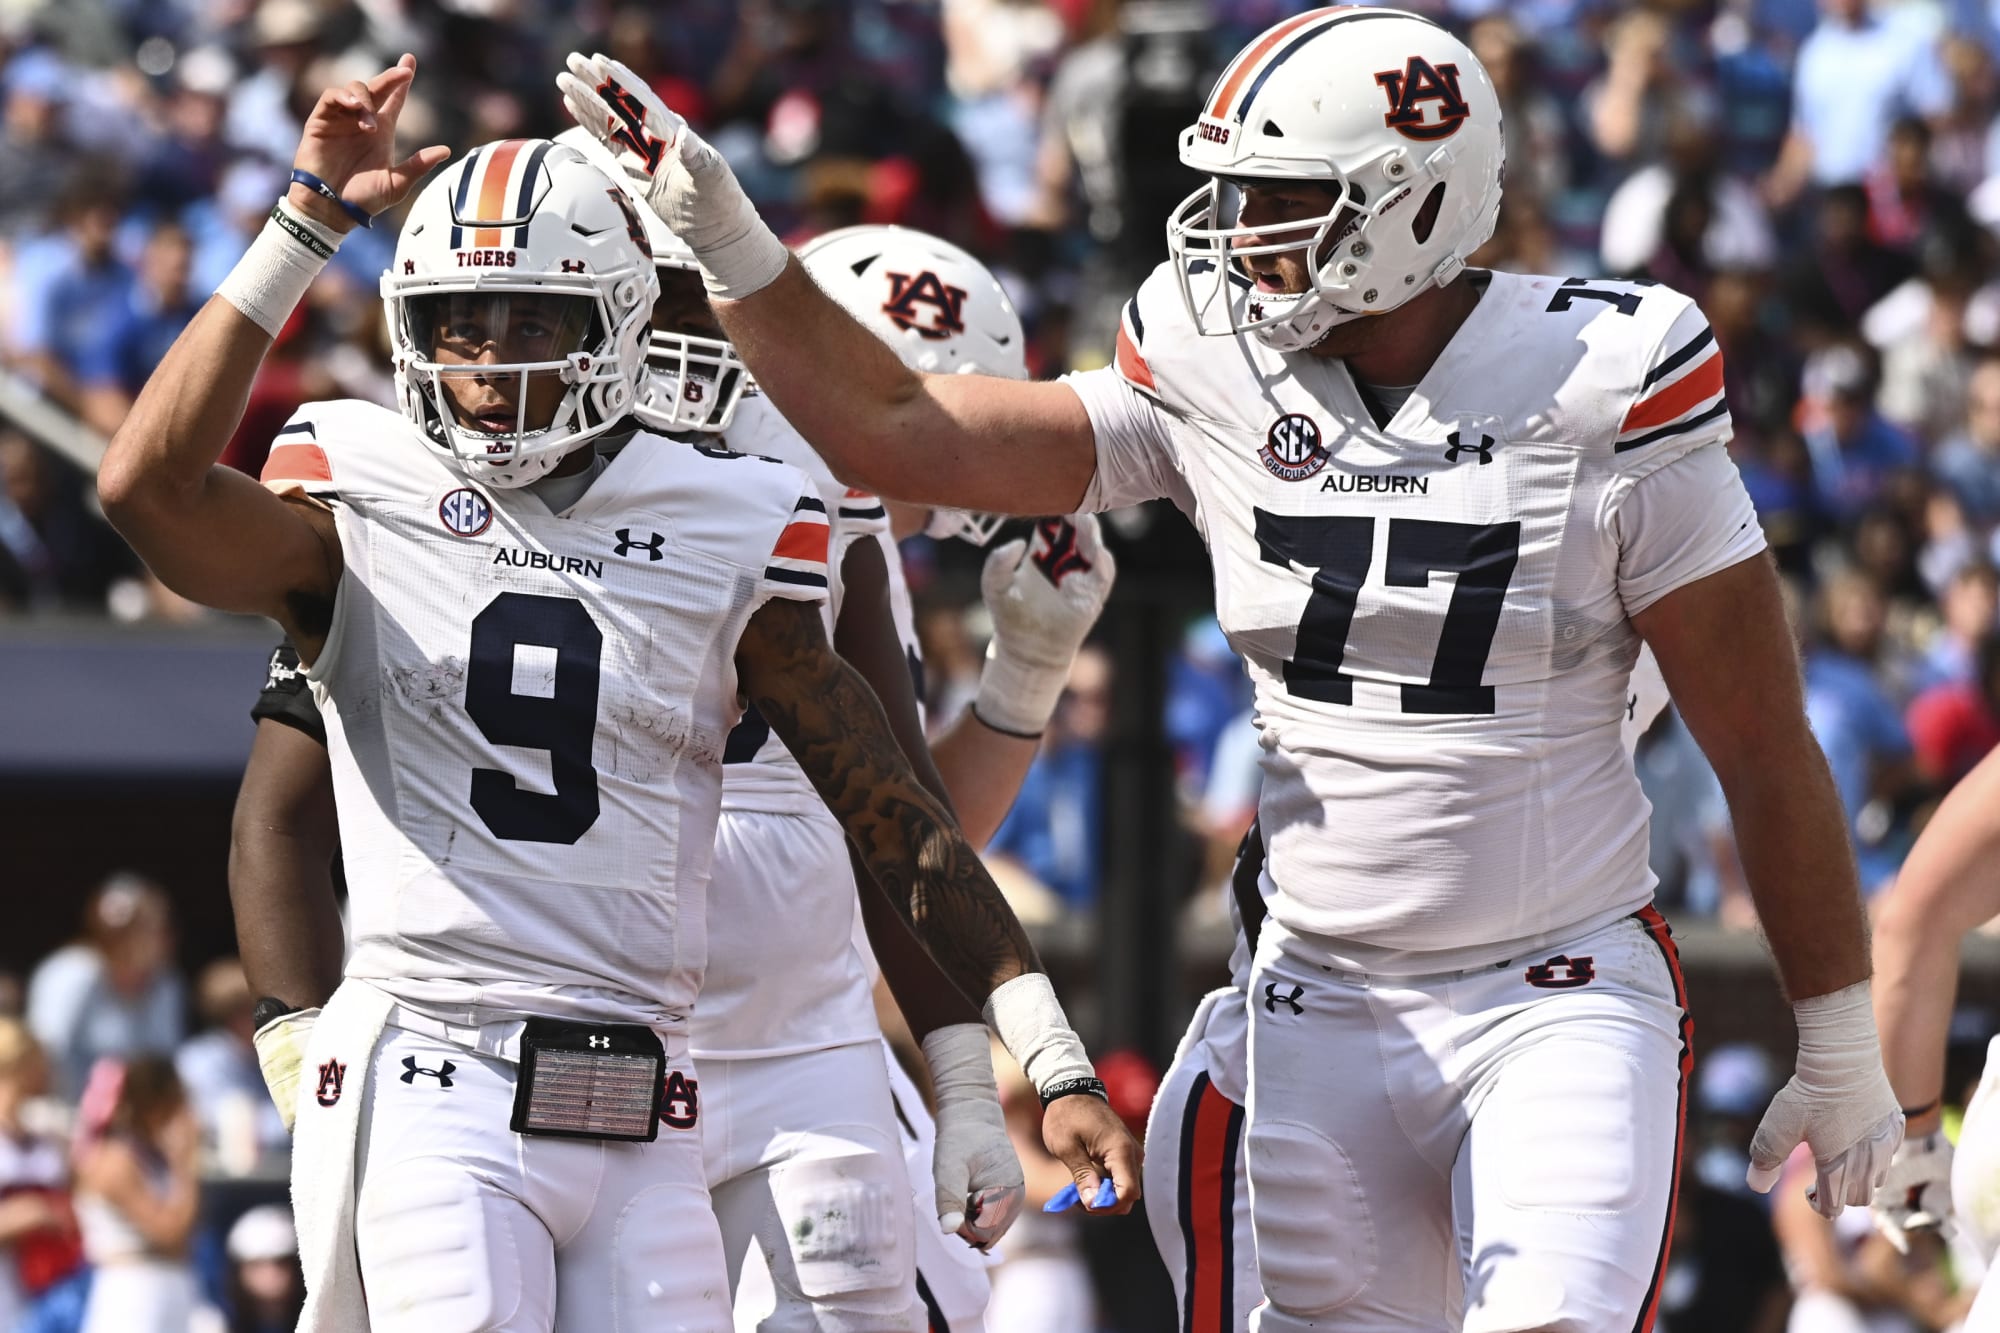 ESPN gives Auburn football 23 8 percent chance to make a bowl game 